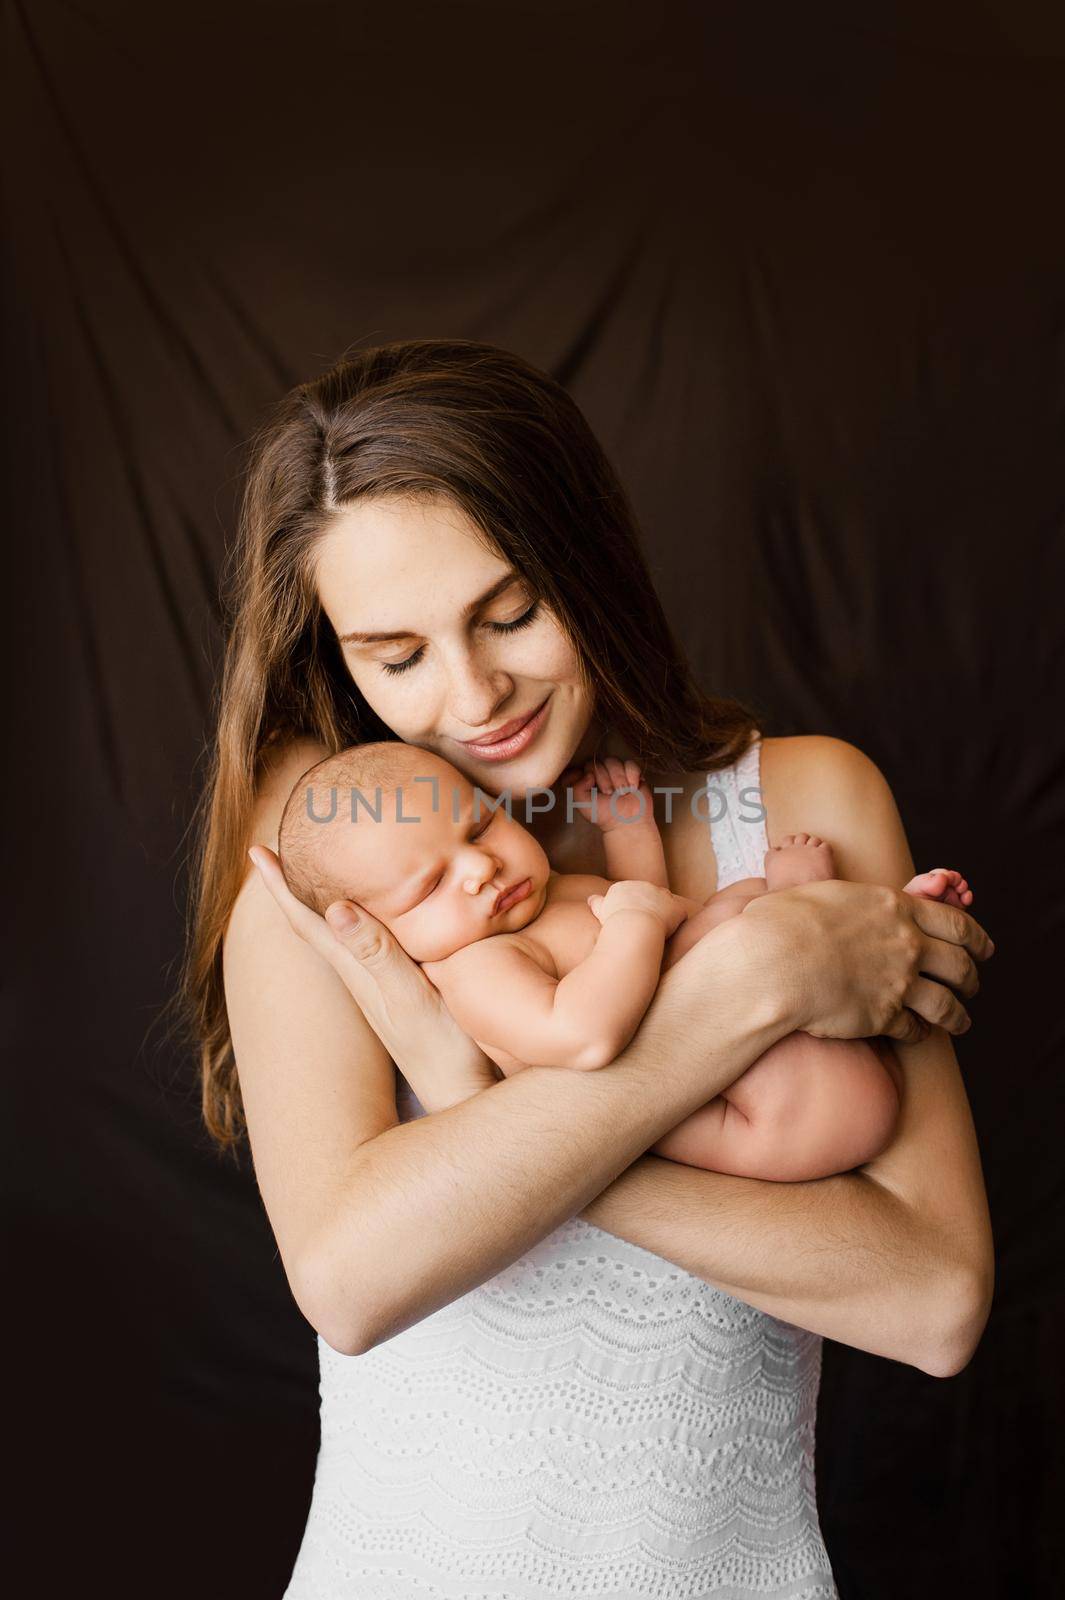 Mother holding her newborn daughter in her arms at a newborn photoshoot. High quality photo